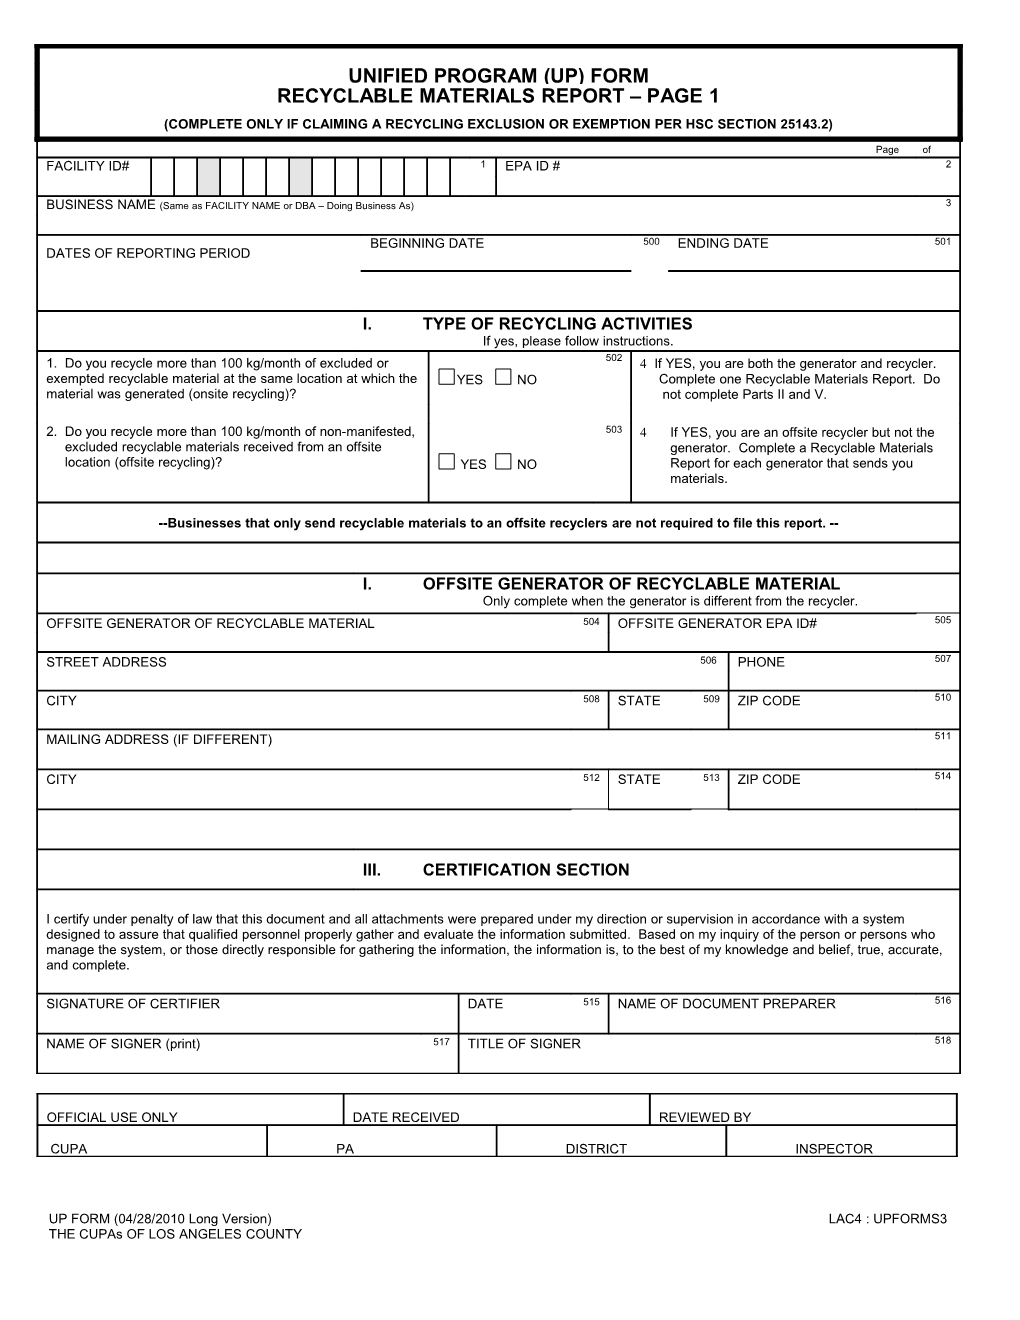 Unified Program (Up) Form